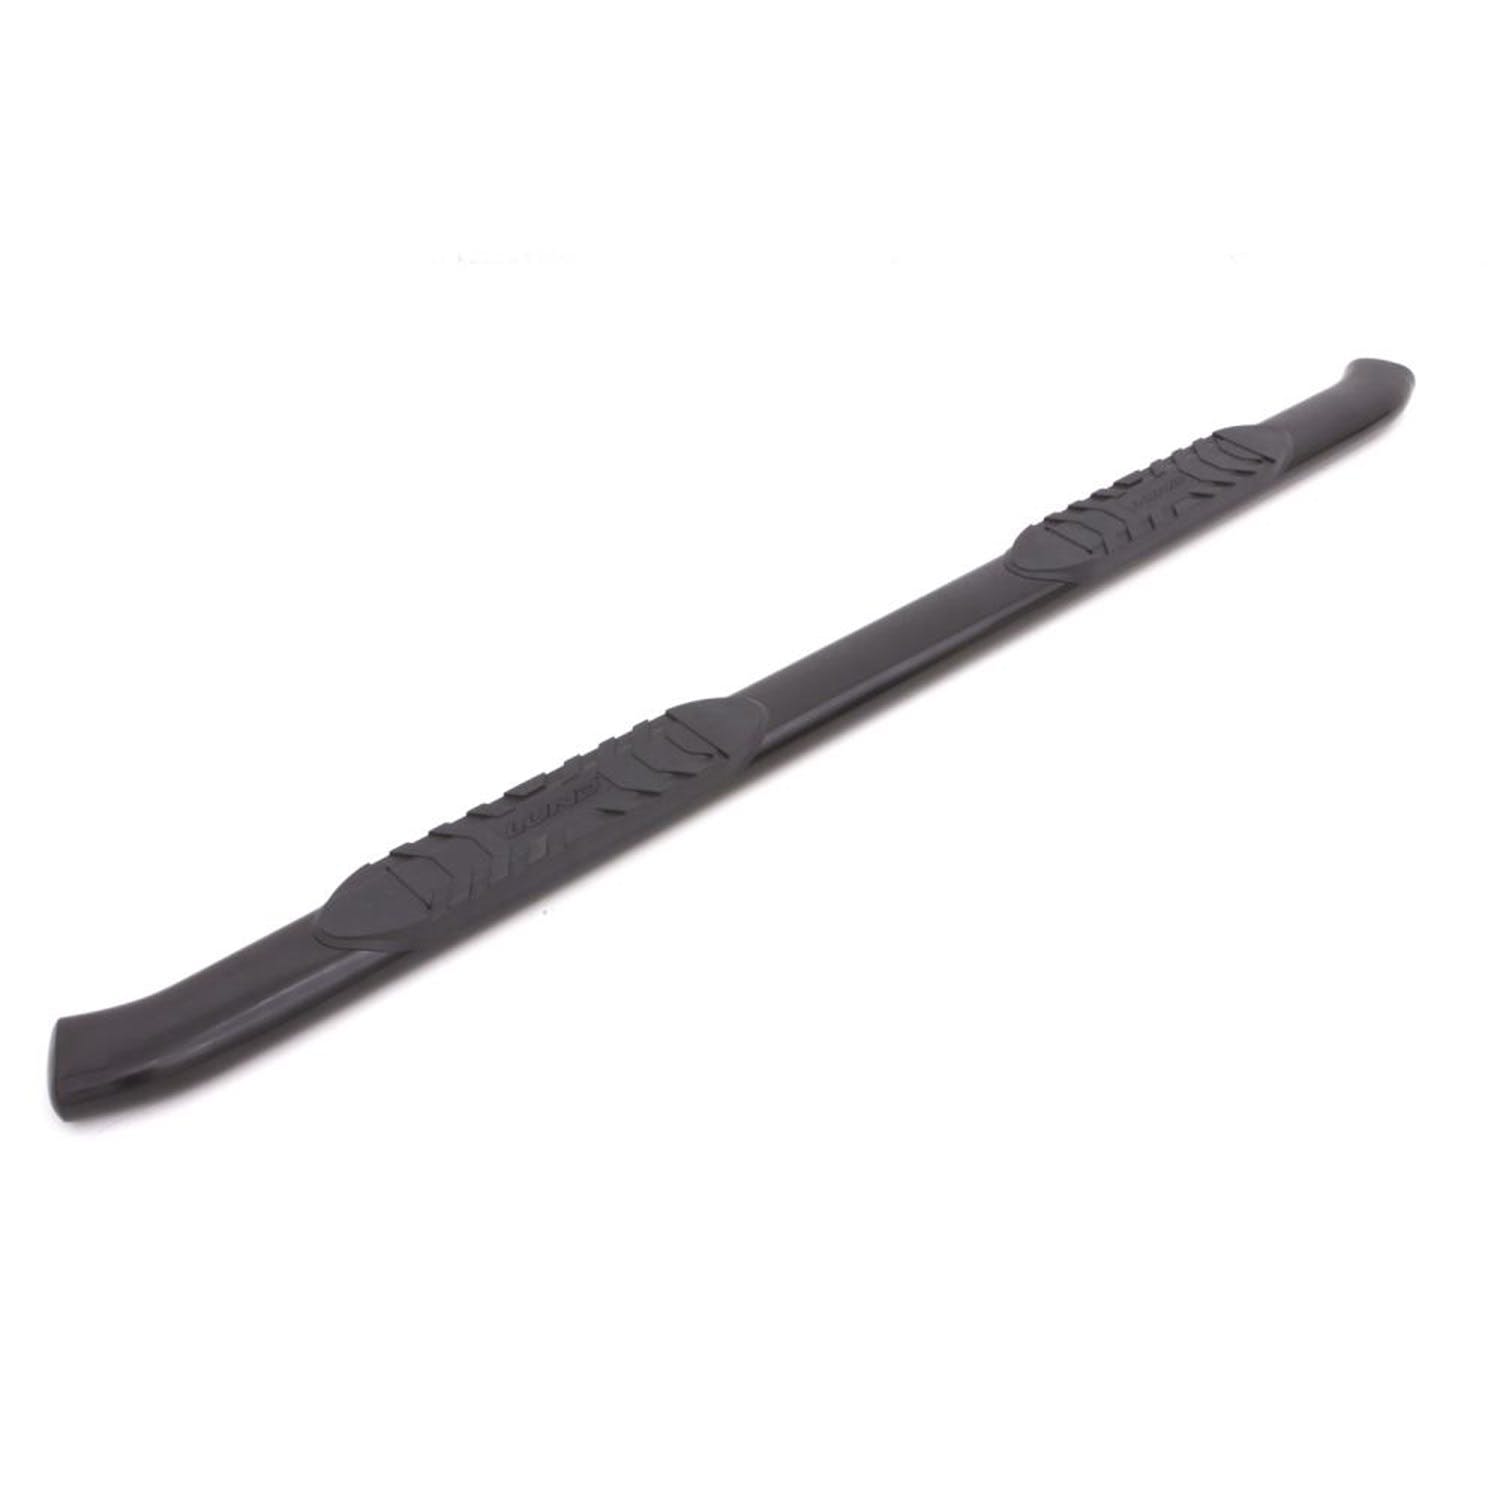 LUND 24276075 5 Inch Oval Curved Nerf Bar - Black LUND -5 inch CURVED OVAL BLACK SS